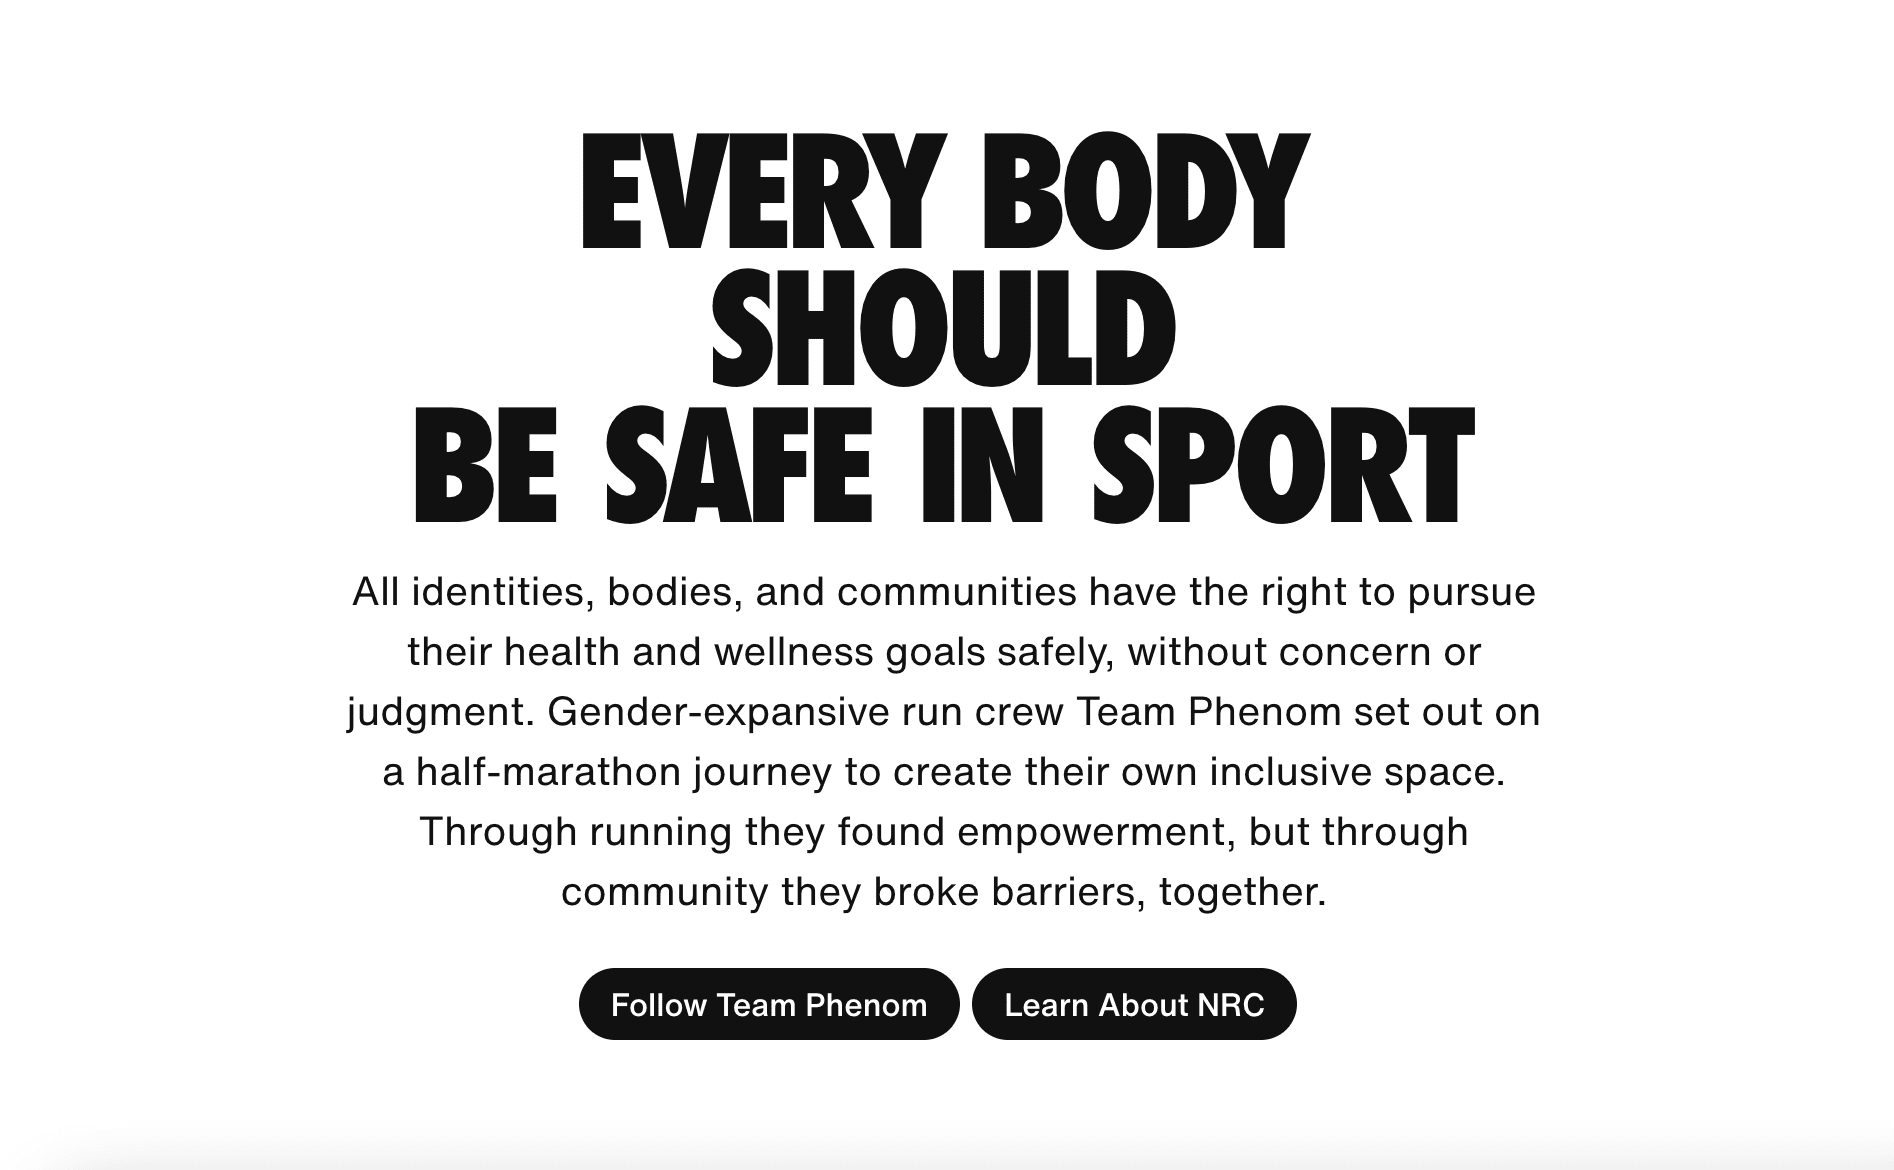 Screenshot of Nike's website section with the headline "Every Body Should Be Safe in Sport."